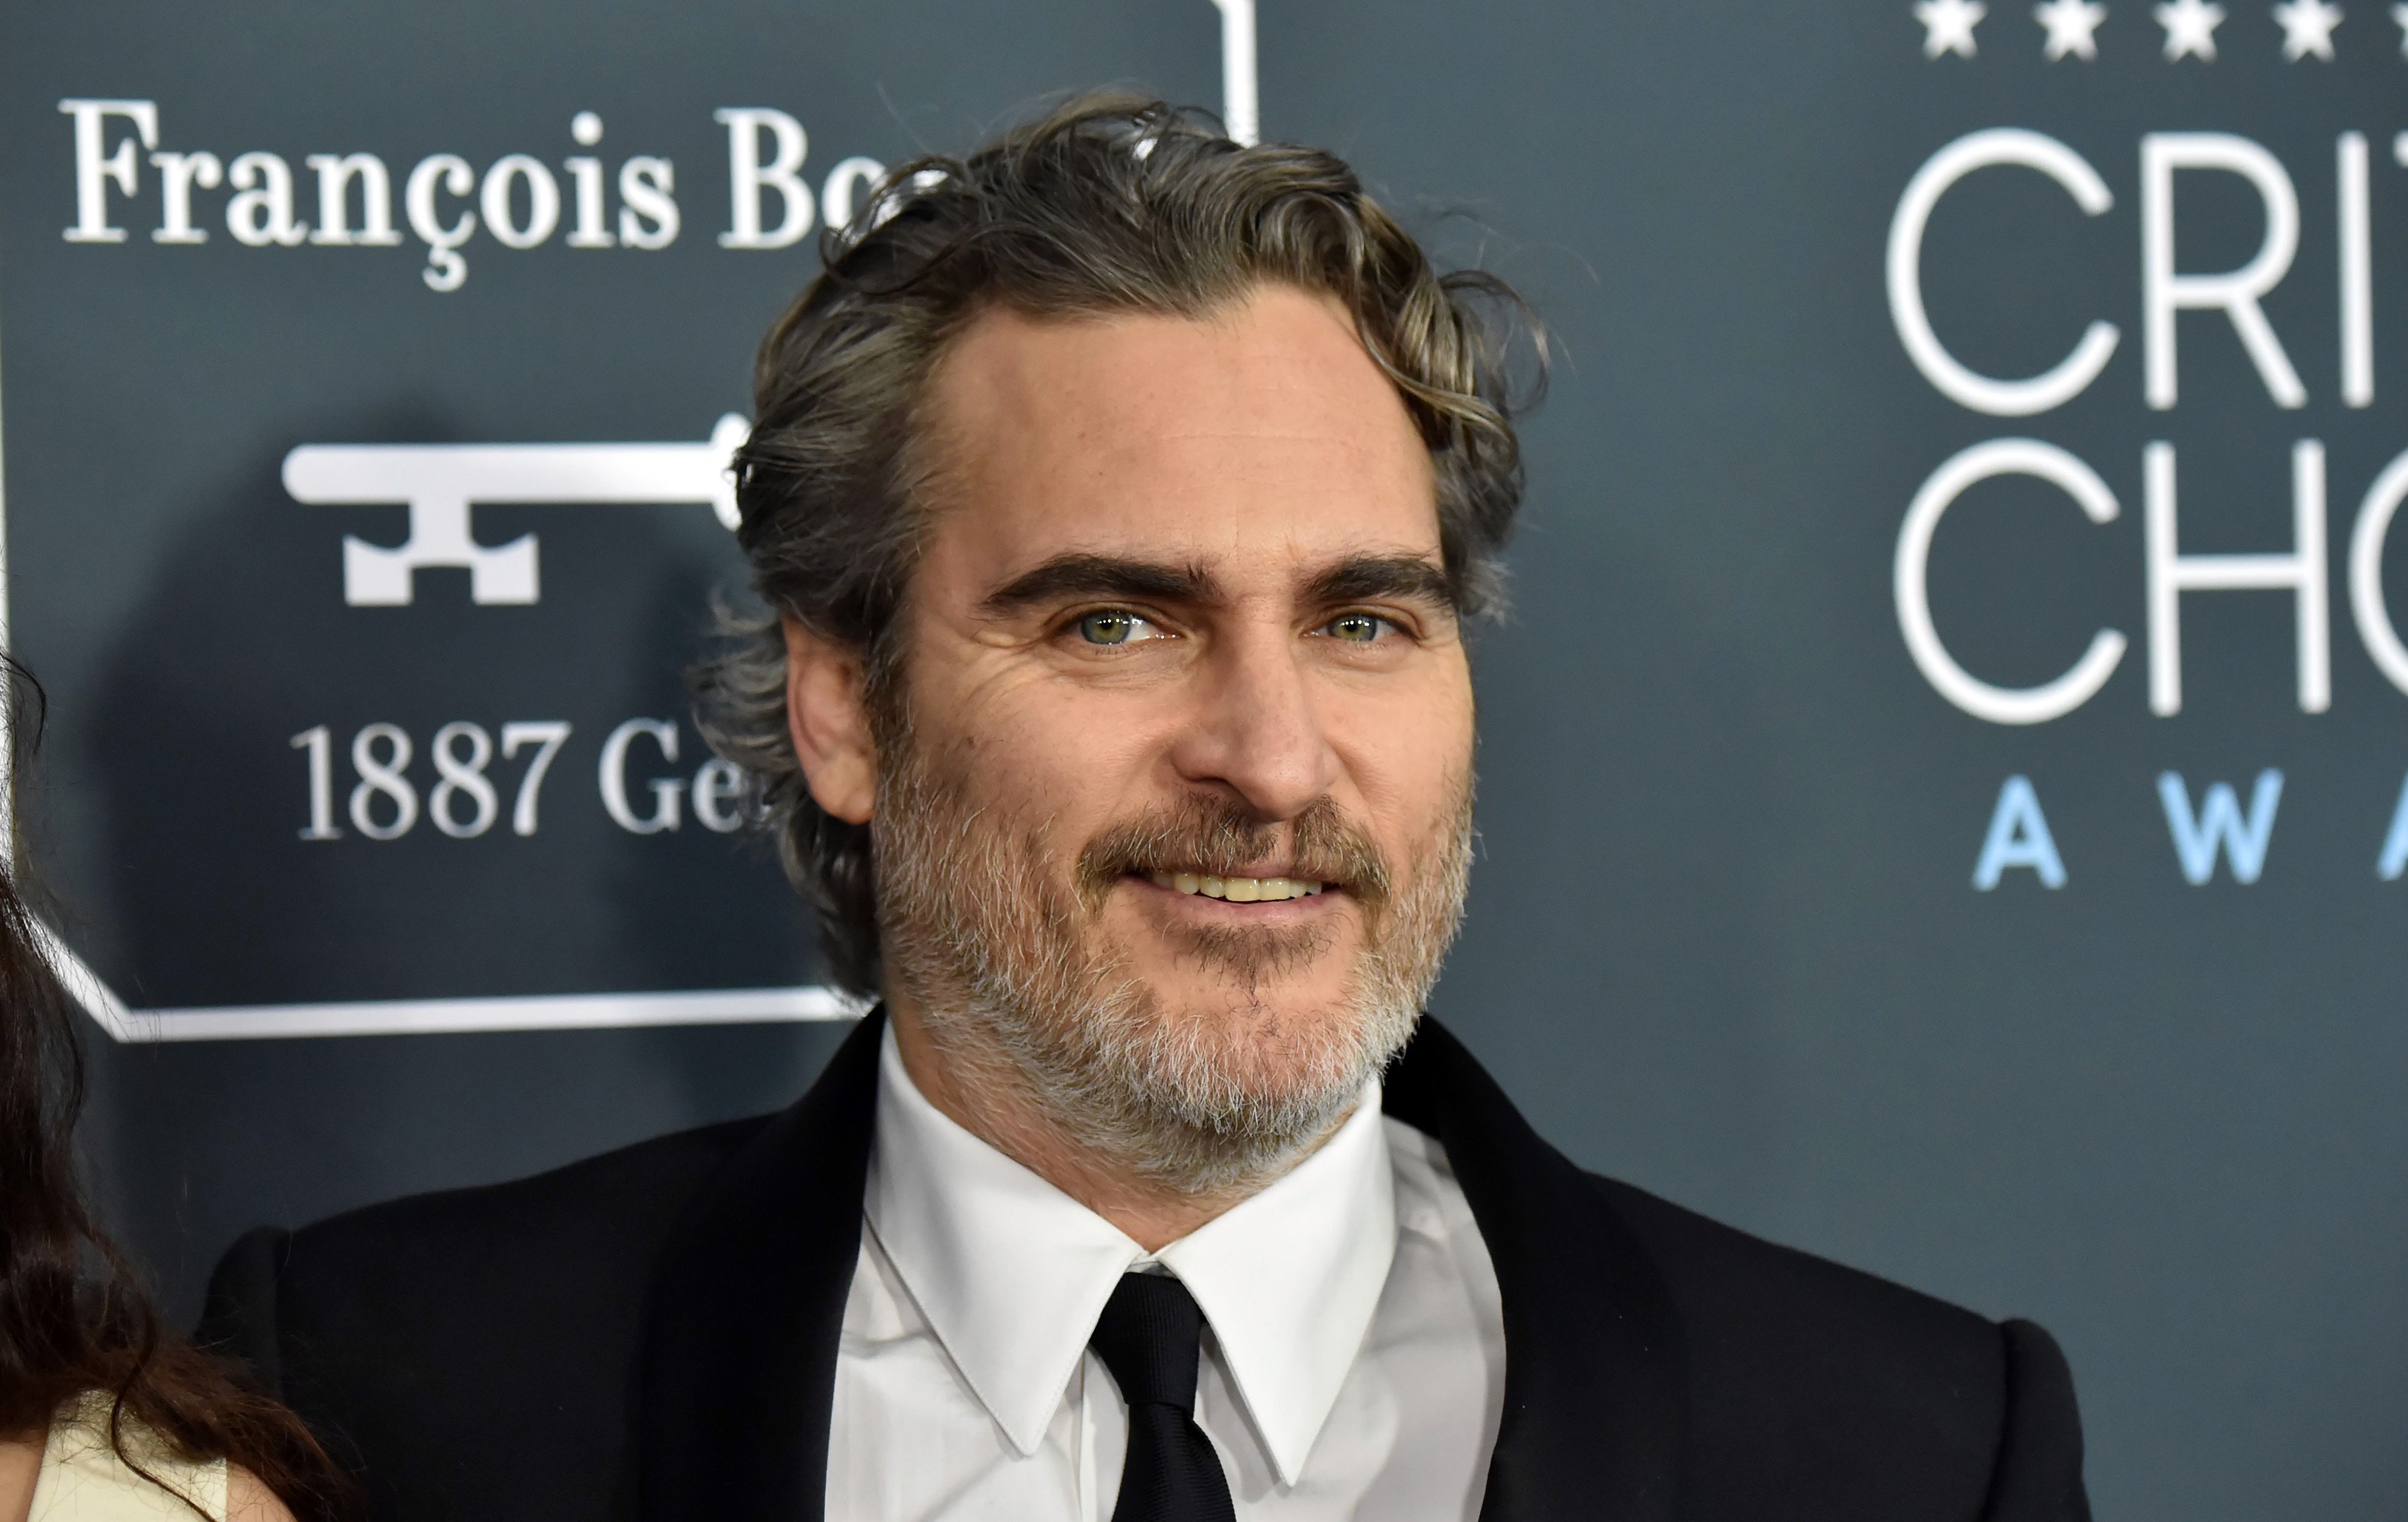 Joaquin Phoenix attends the 25th Annual Critics' Choice Awards at Barker Hangar on January 12, 2020, in Santa Monica, California. | Source: Getty Images.